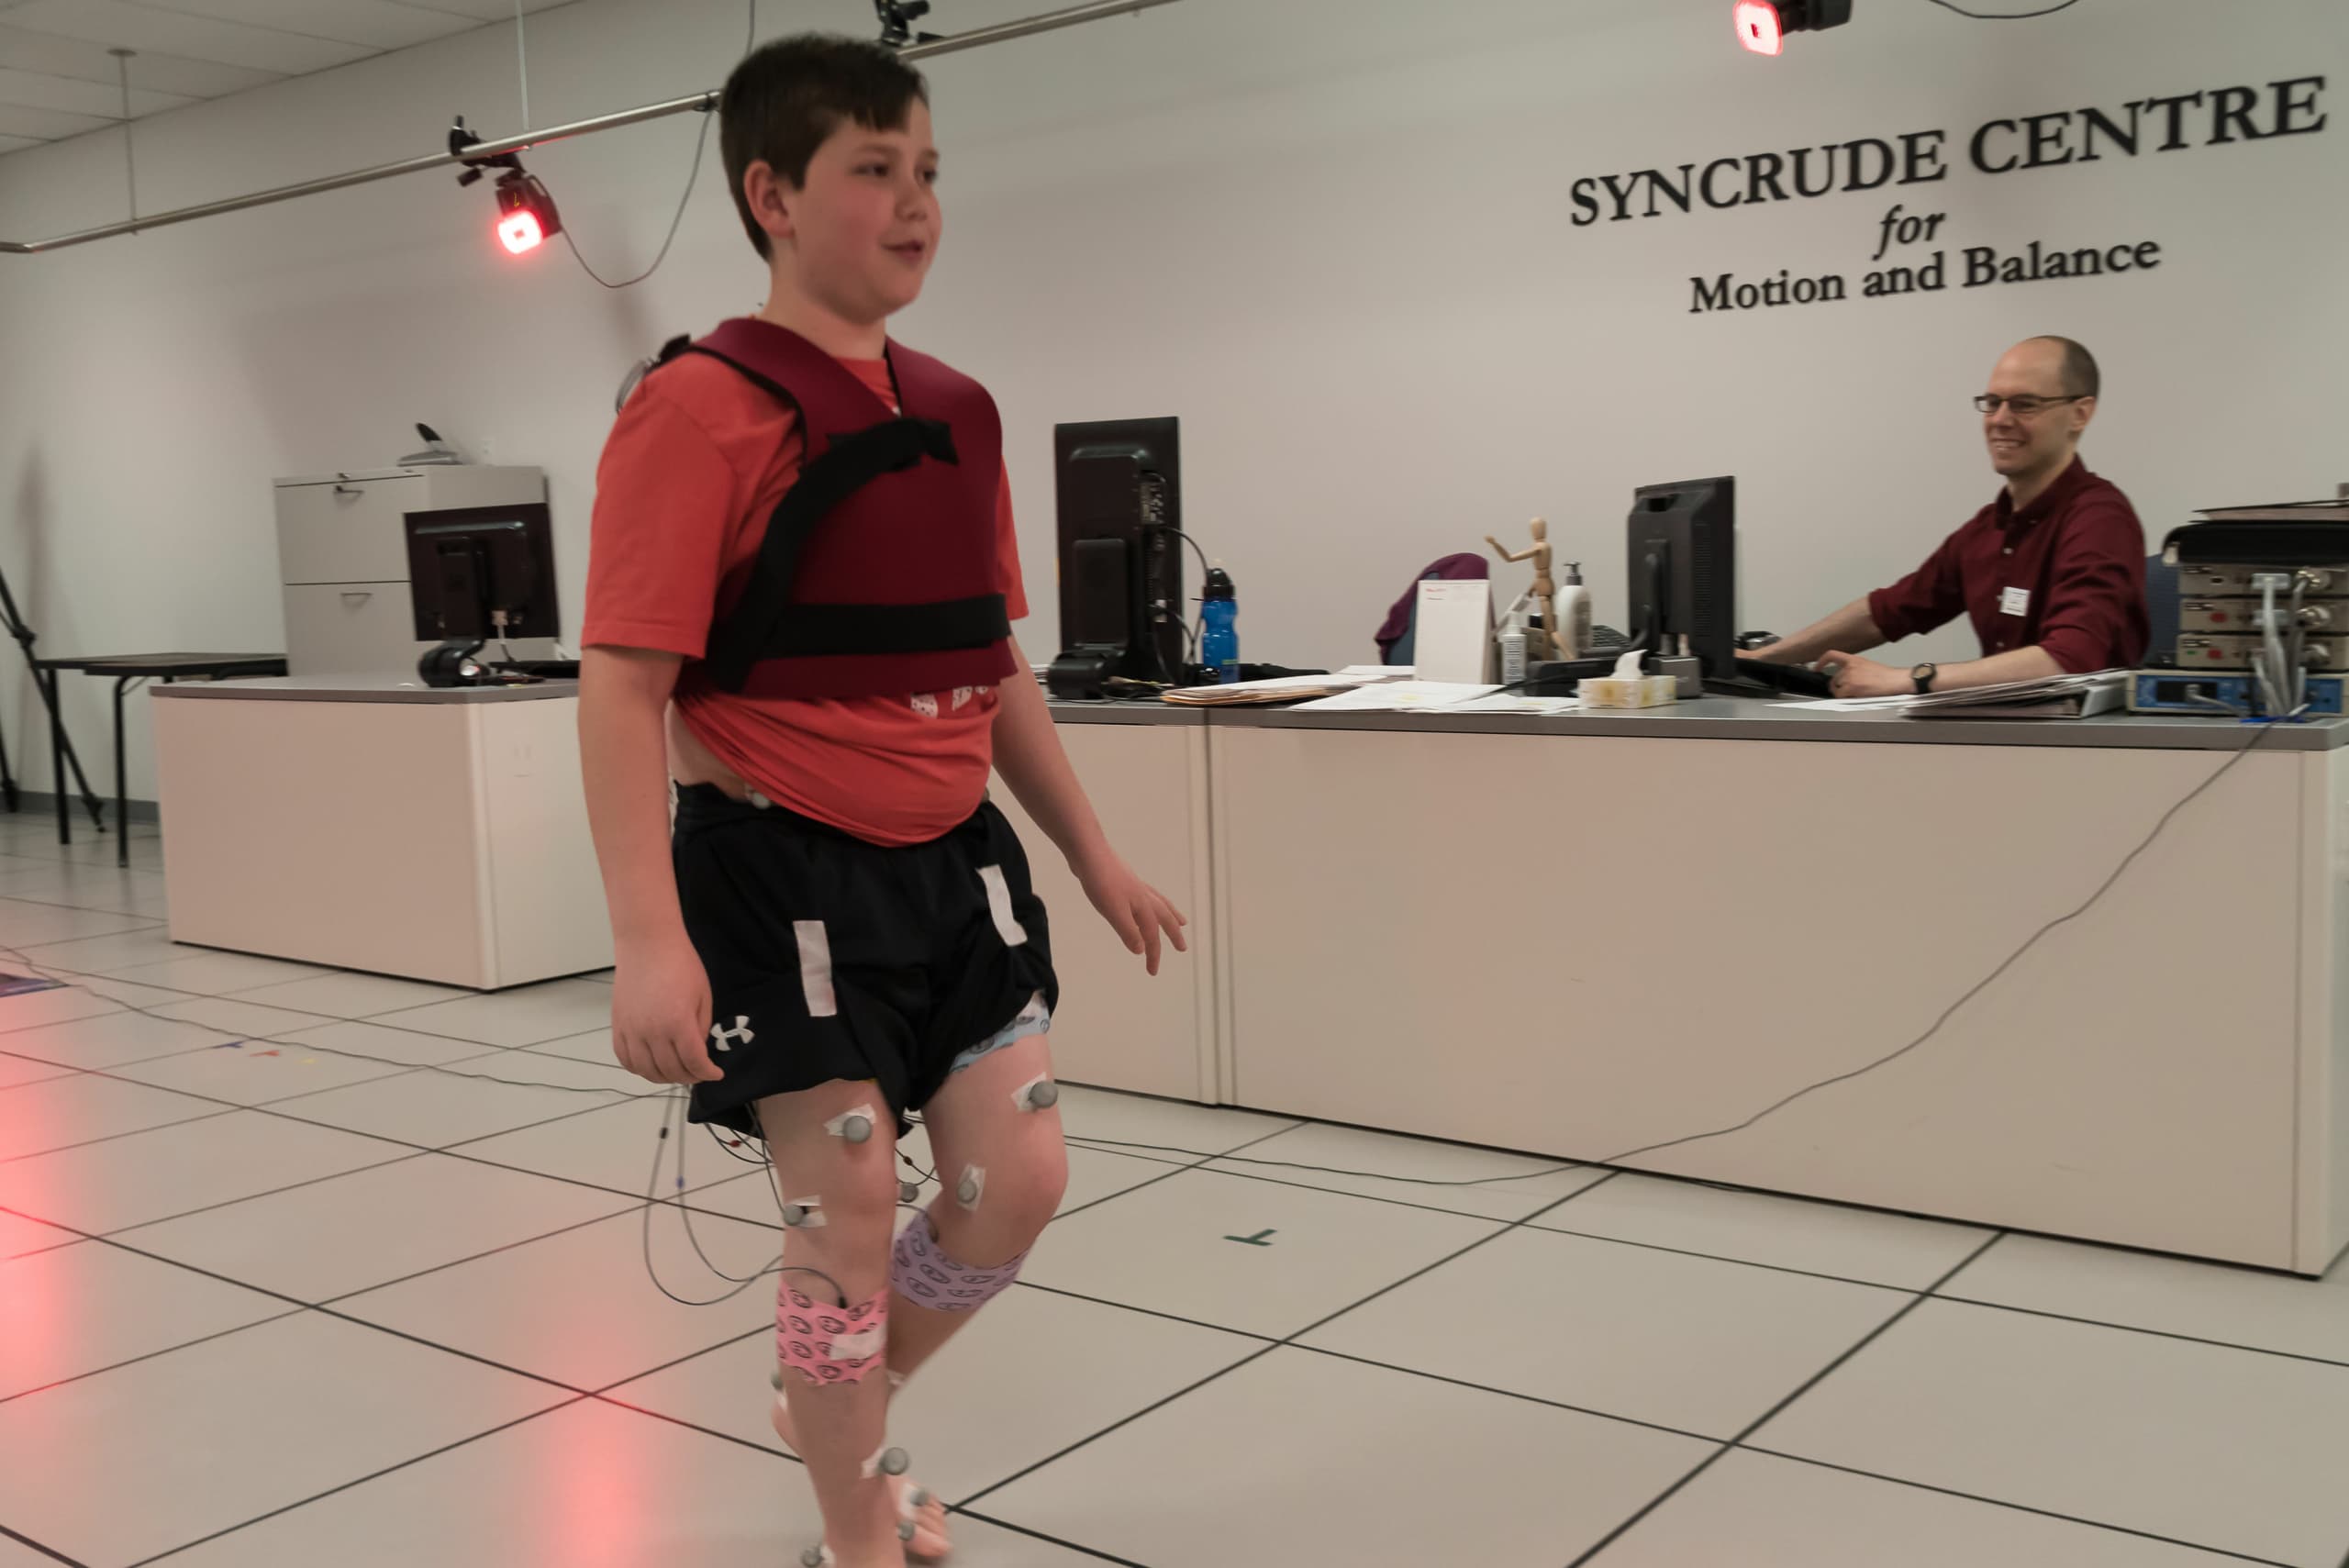 Child with gate sensors attached in Syncrude Centre for Motion and Balance.